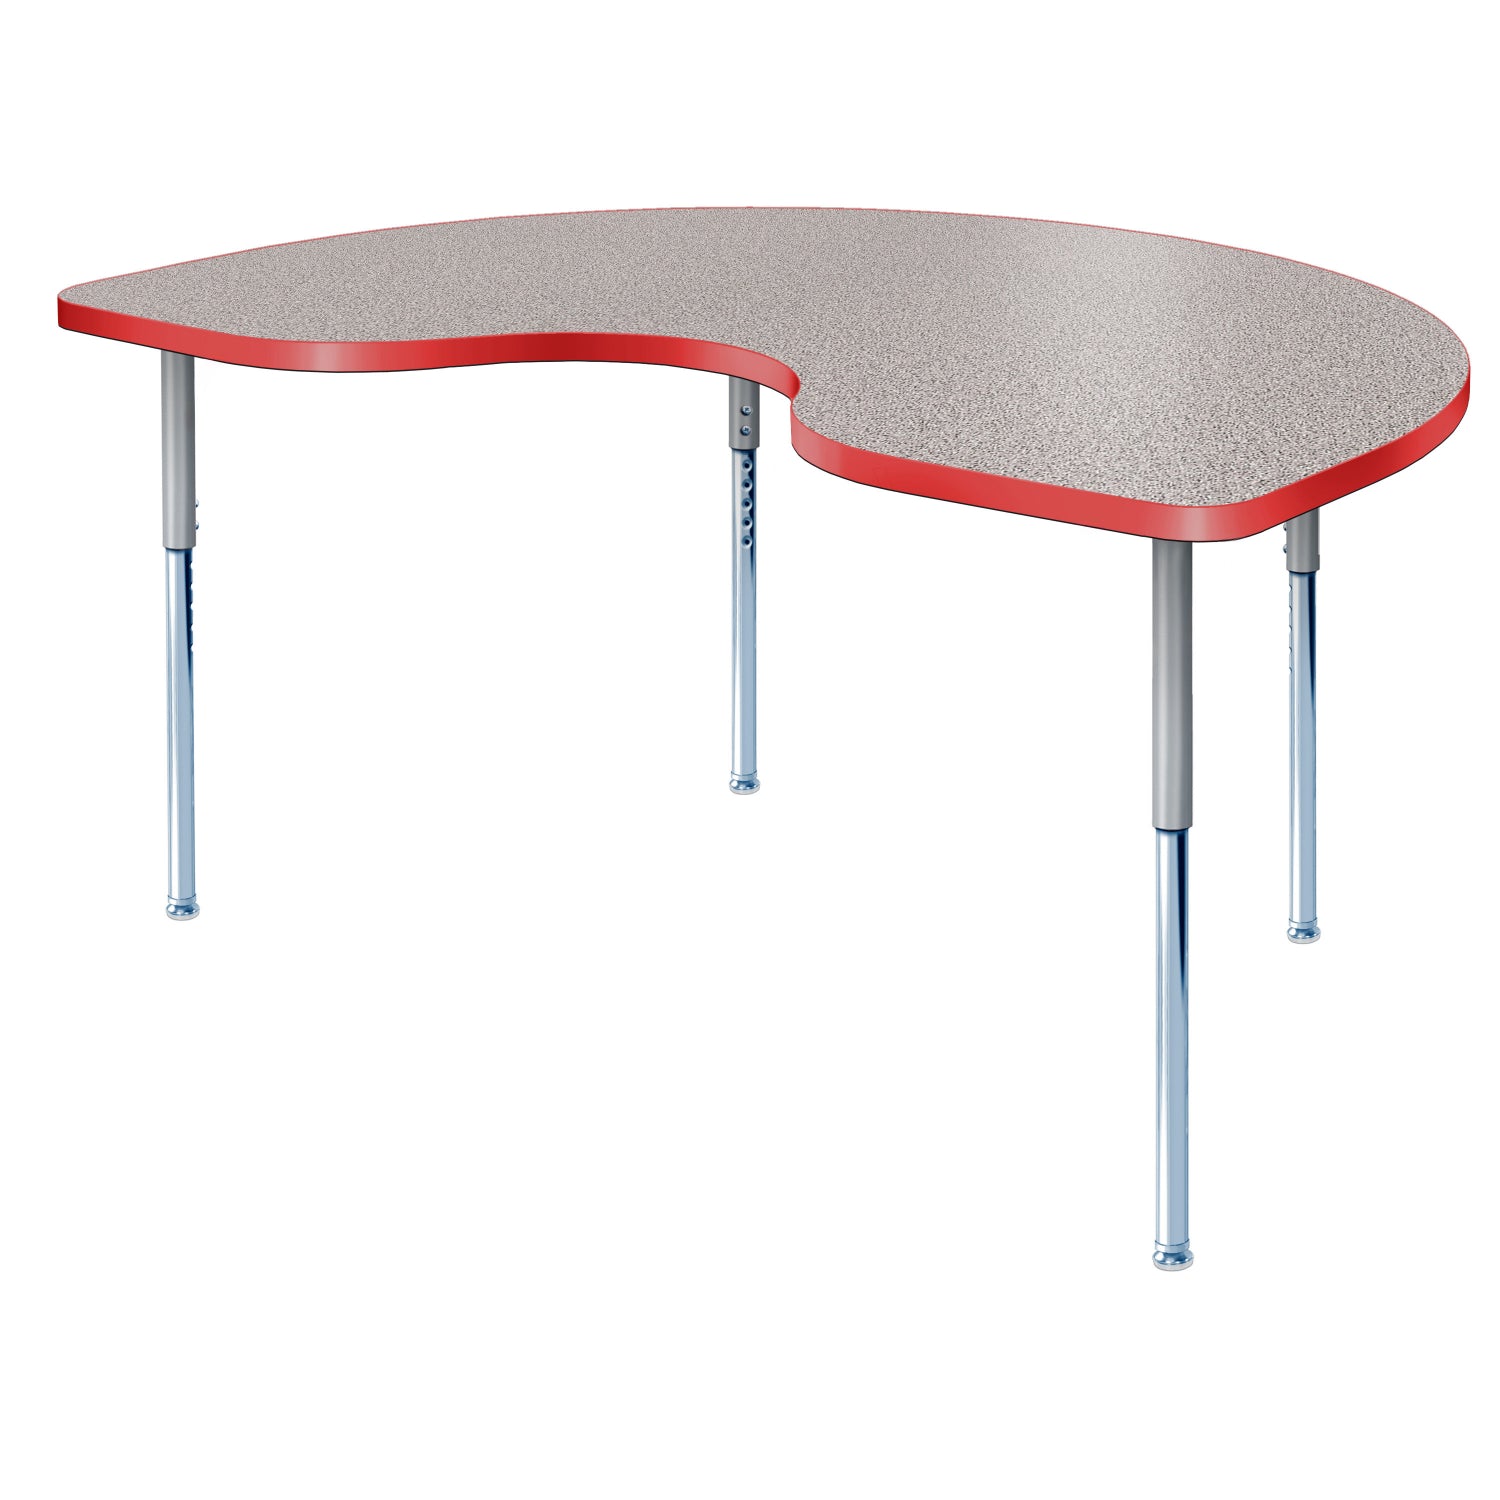 Modern Classic Series 48 x 72" Kidney Activity Table with High Pressure Laminate Top, Adjustable Height Legs